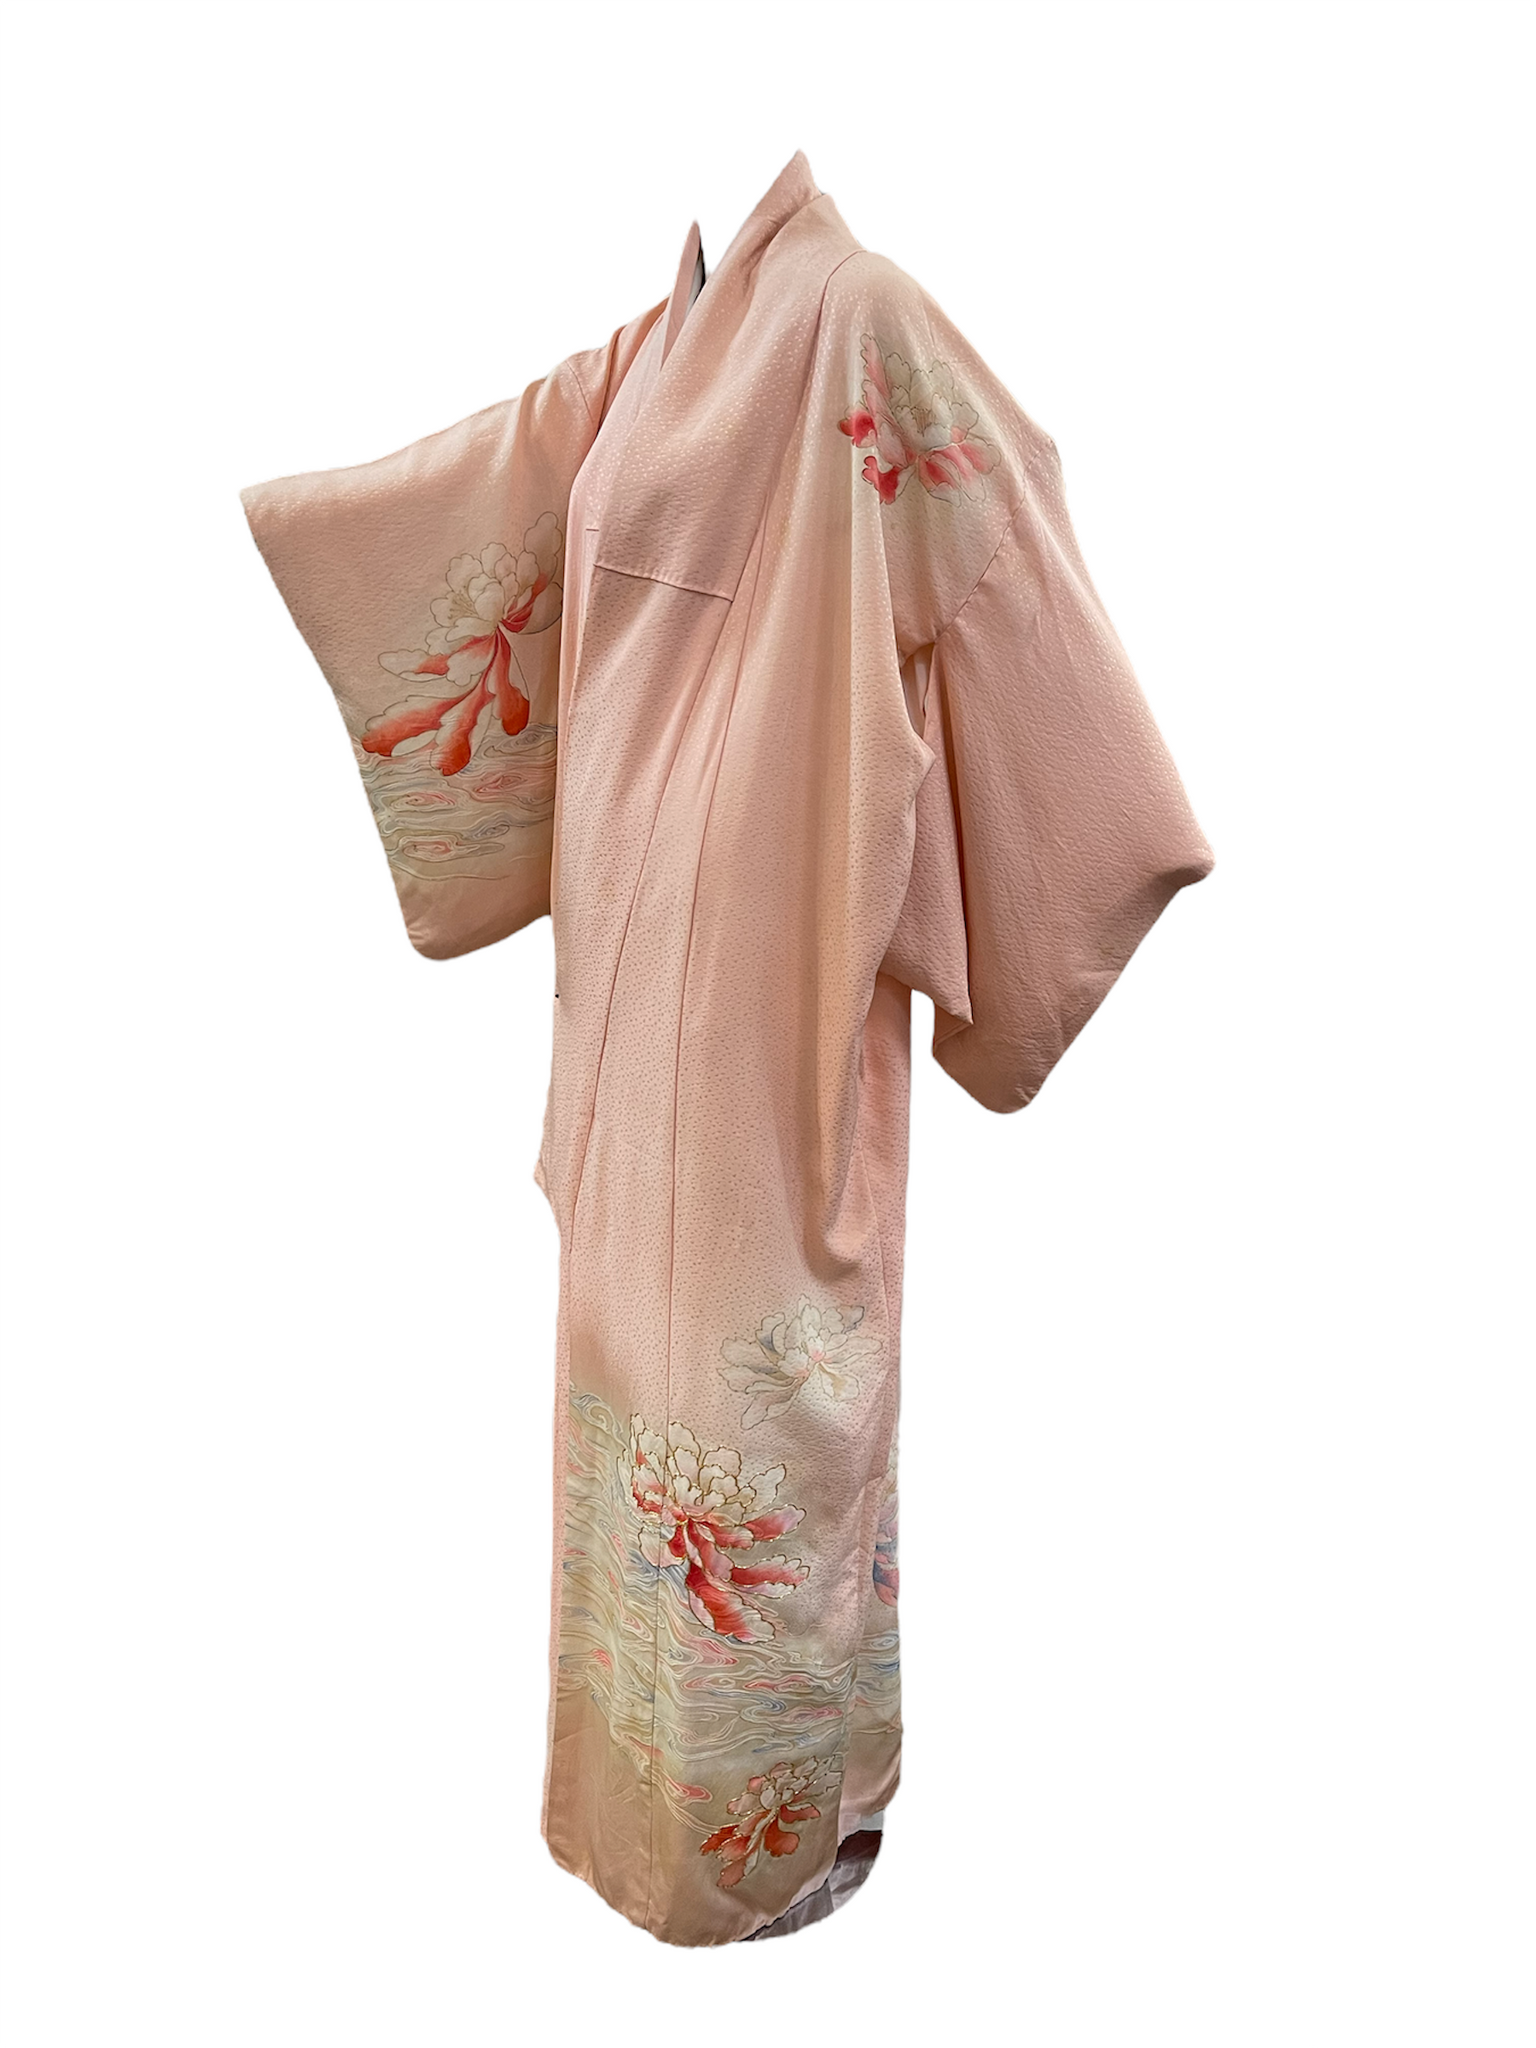 Japanese 20th Century Pale Pink Silk Hand Painted Kimono  SIDE 2 of 7